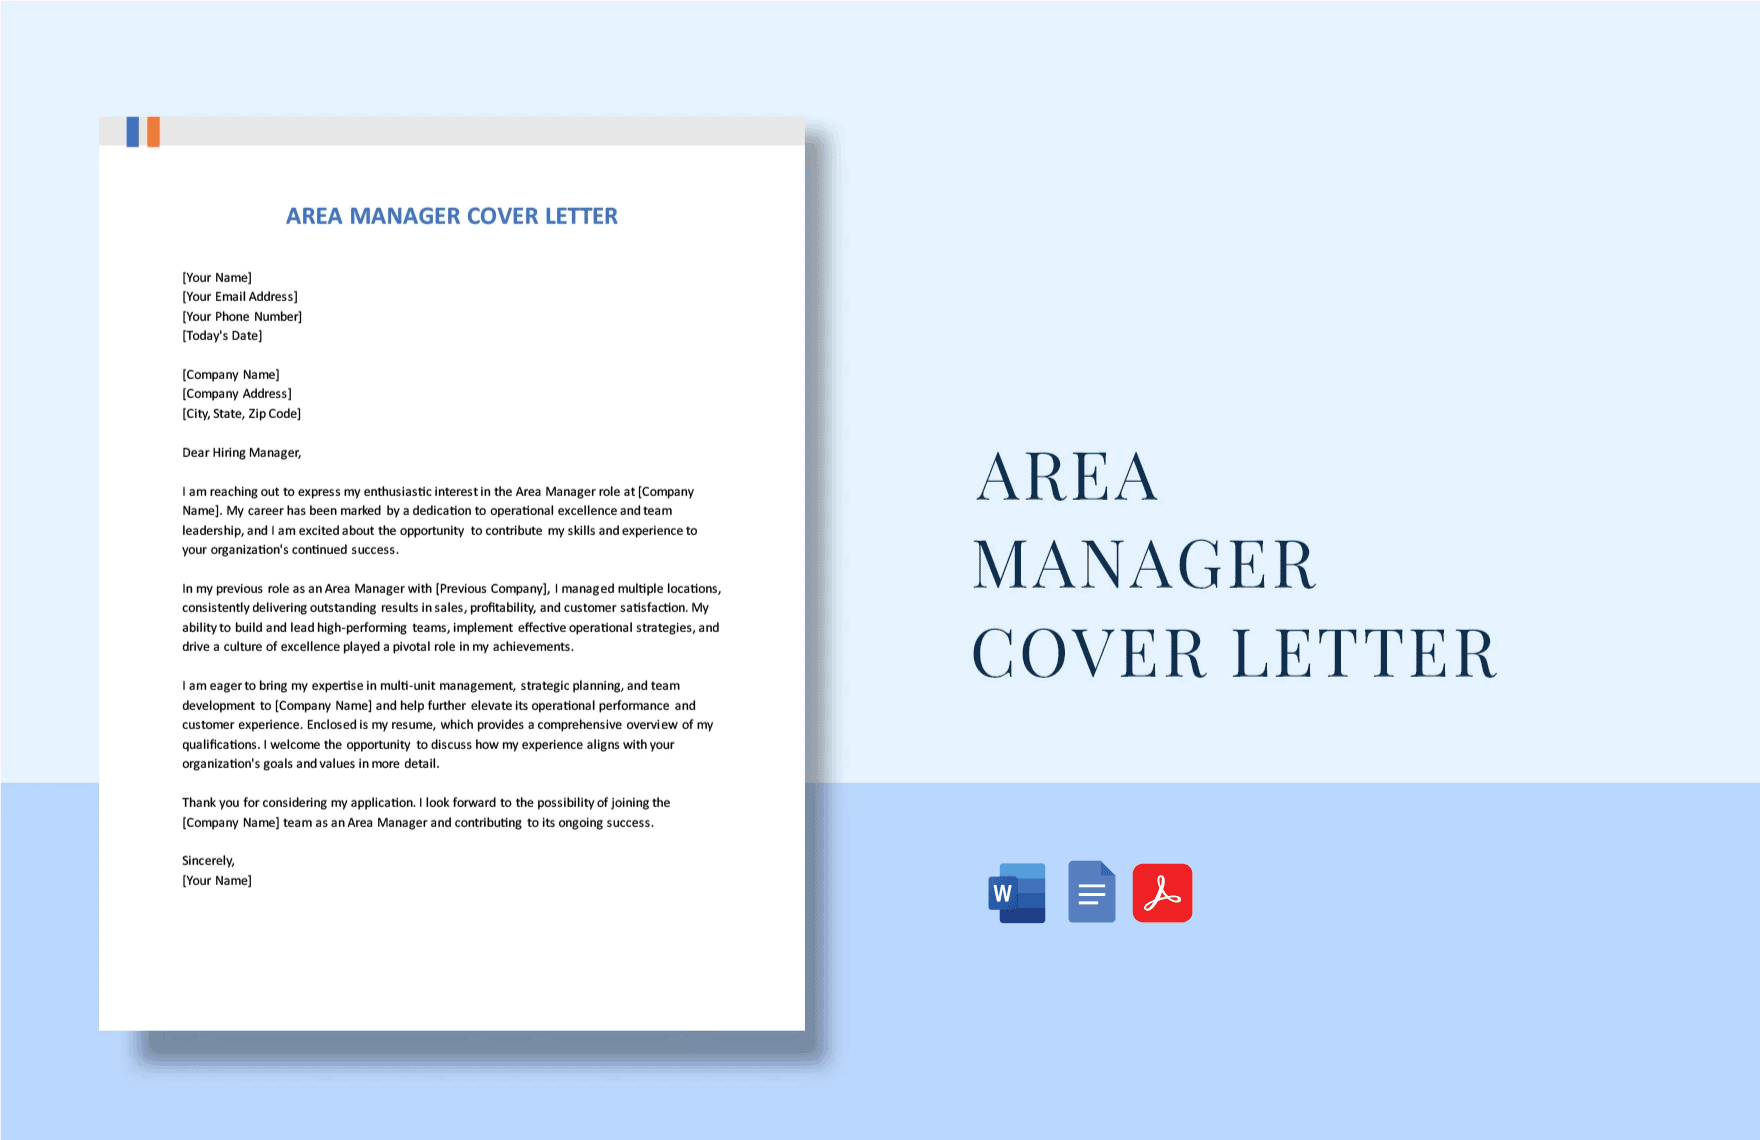 Free Area Manager Cover Letter in Word, Google Docs, PDF